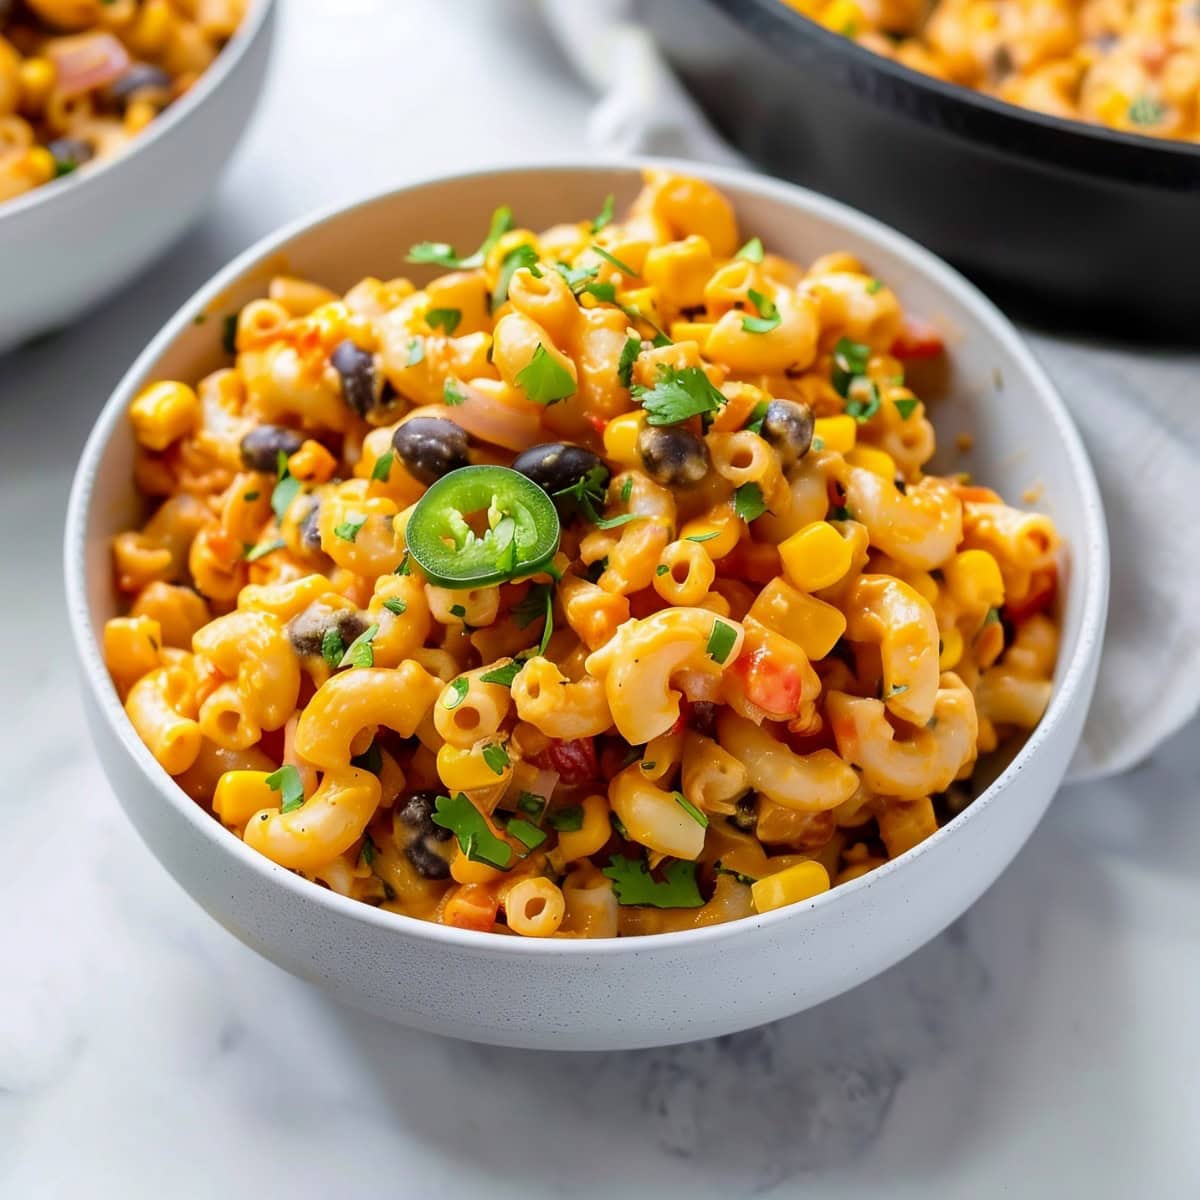 Spicy Mexican mac and cheese, featuring cheesy sauce, jalapenos, bell peppers, black beans and cilantro